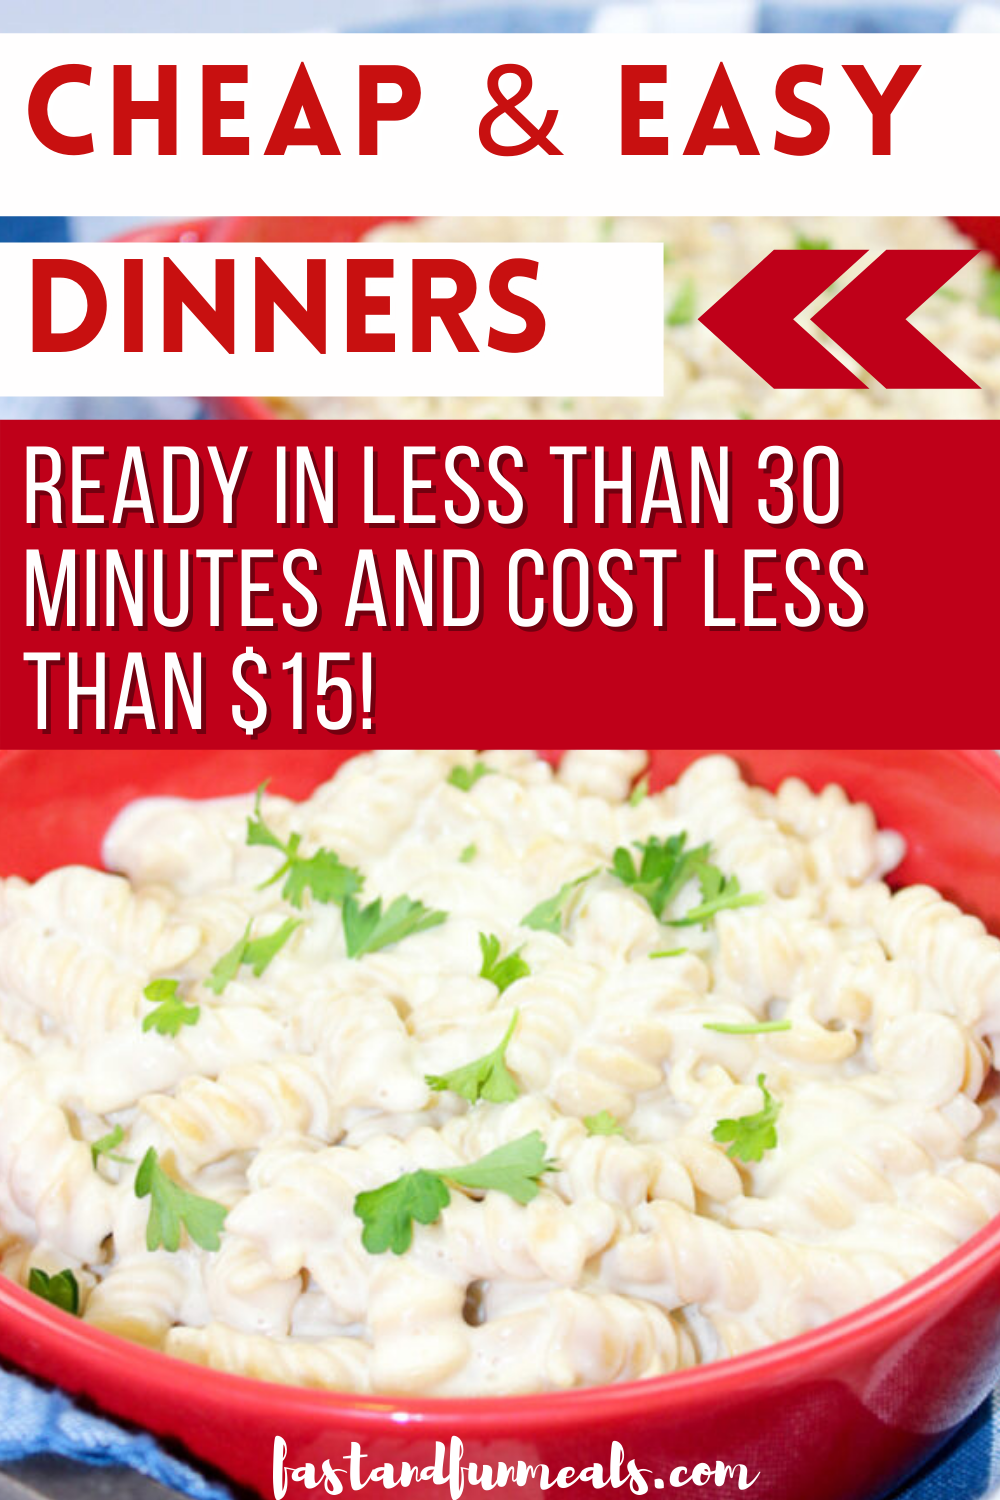 Pin showing Cheap and Easy Dinners Ready in Less than 30 minutes and Cost less than $15